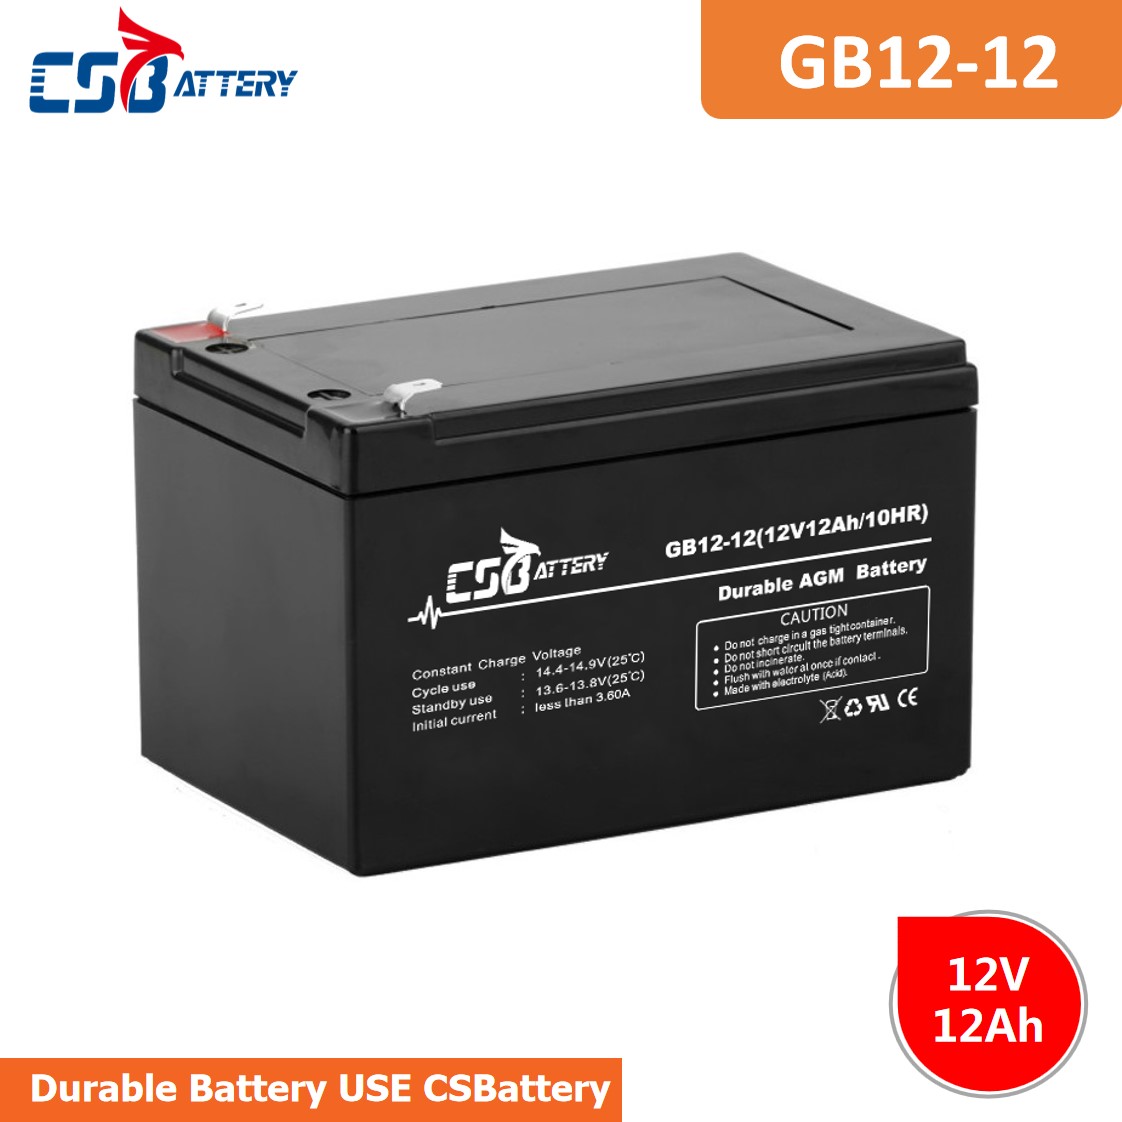 CSBattery 12V 5Ah power-storage  Lead acid battery for Engine-start/power-tools/Electric-Bicycle/Automotive 							